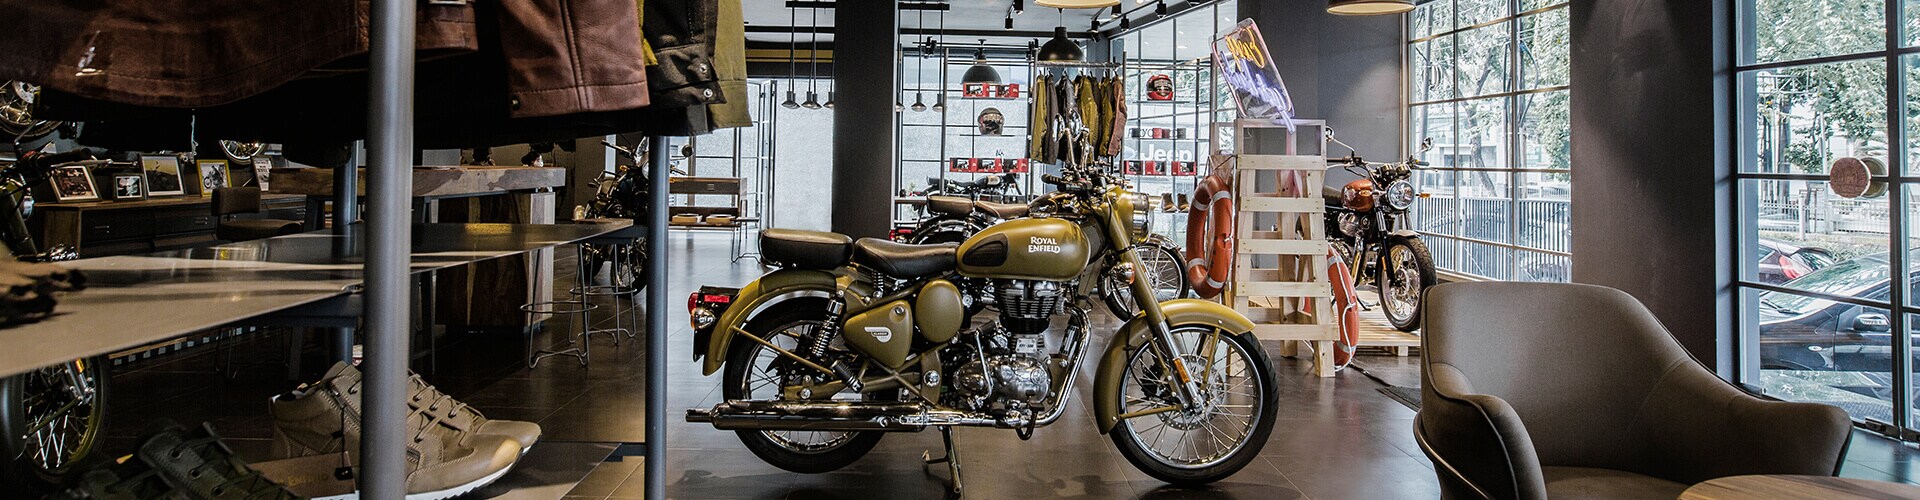 Royal Enfield Dealers in Indonesia